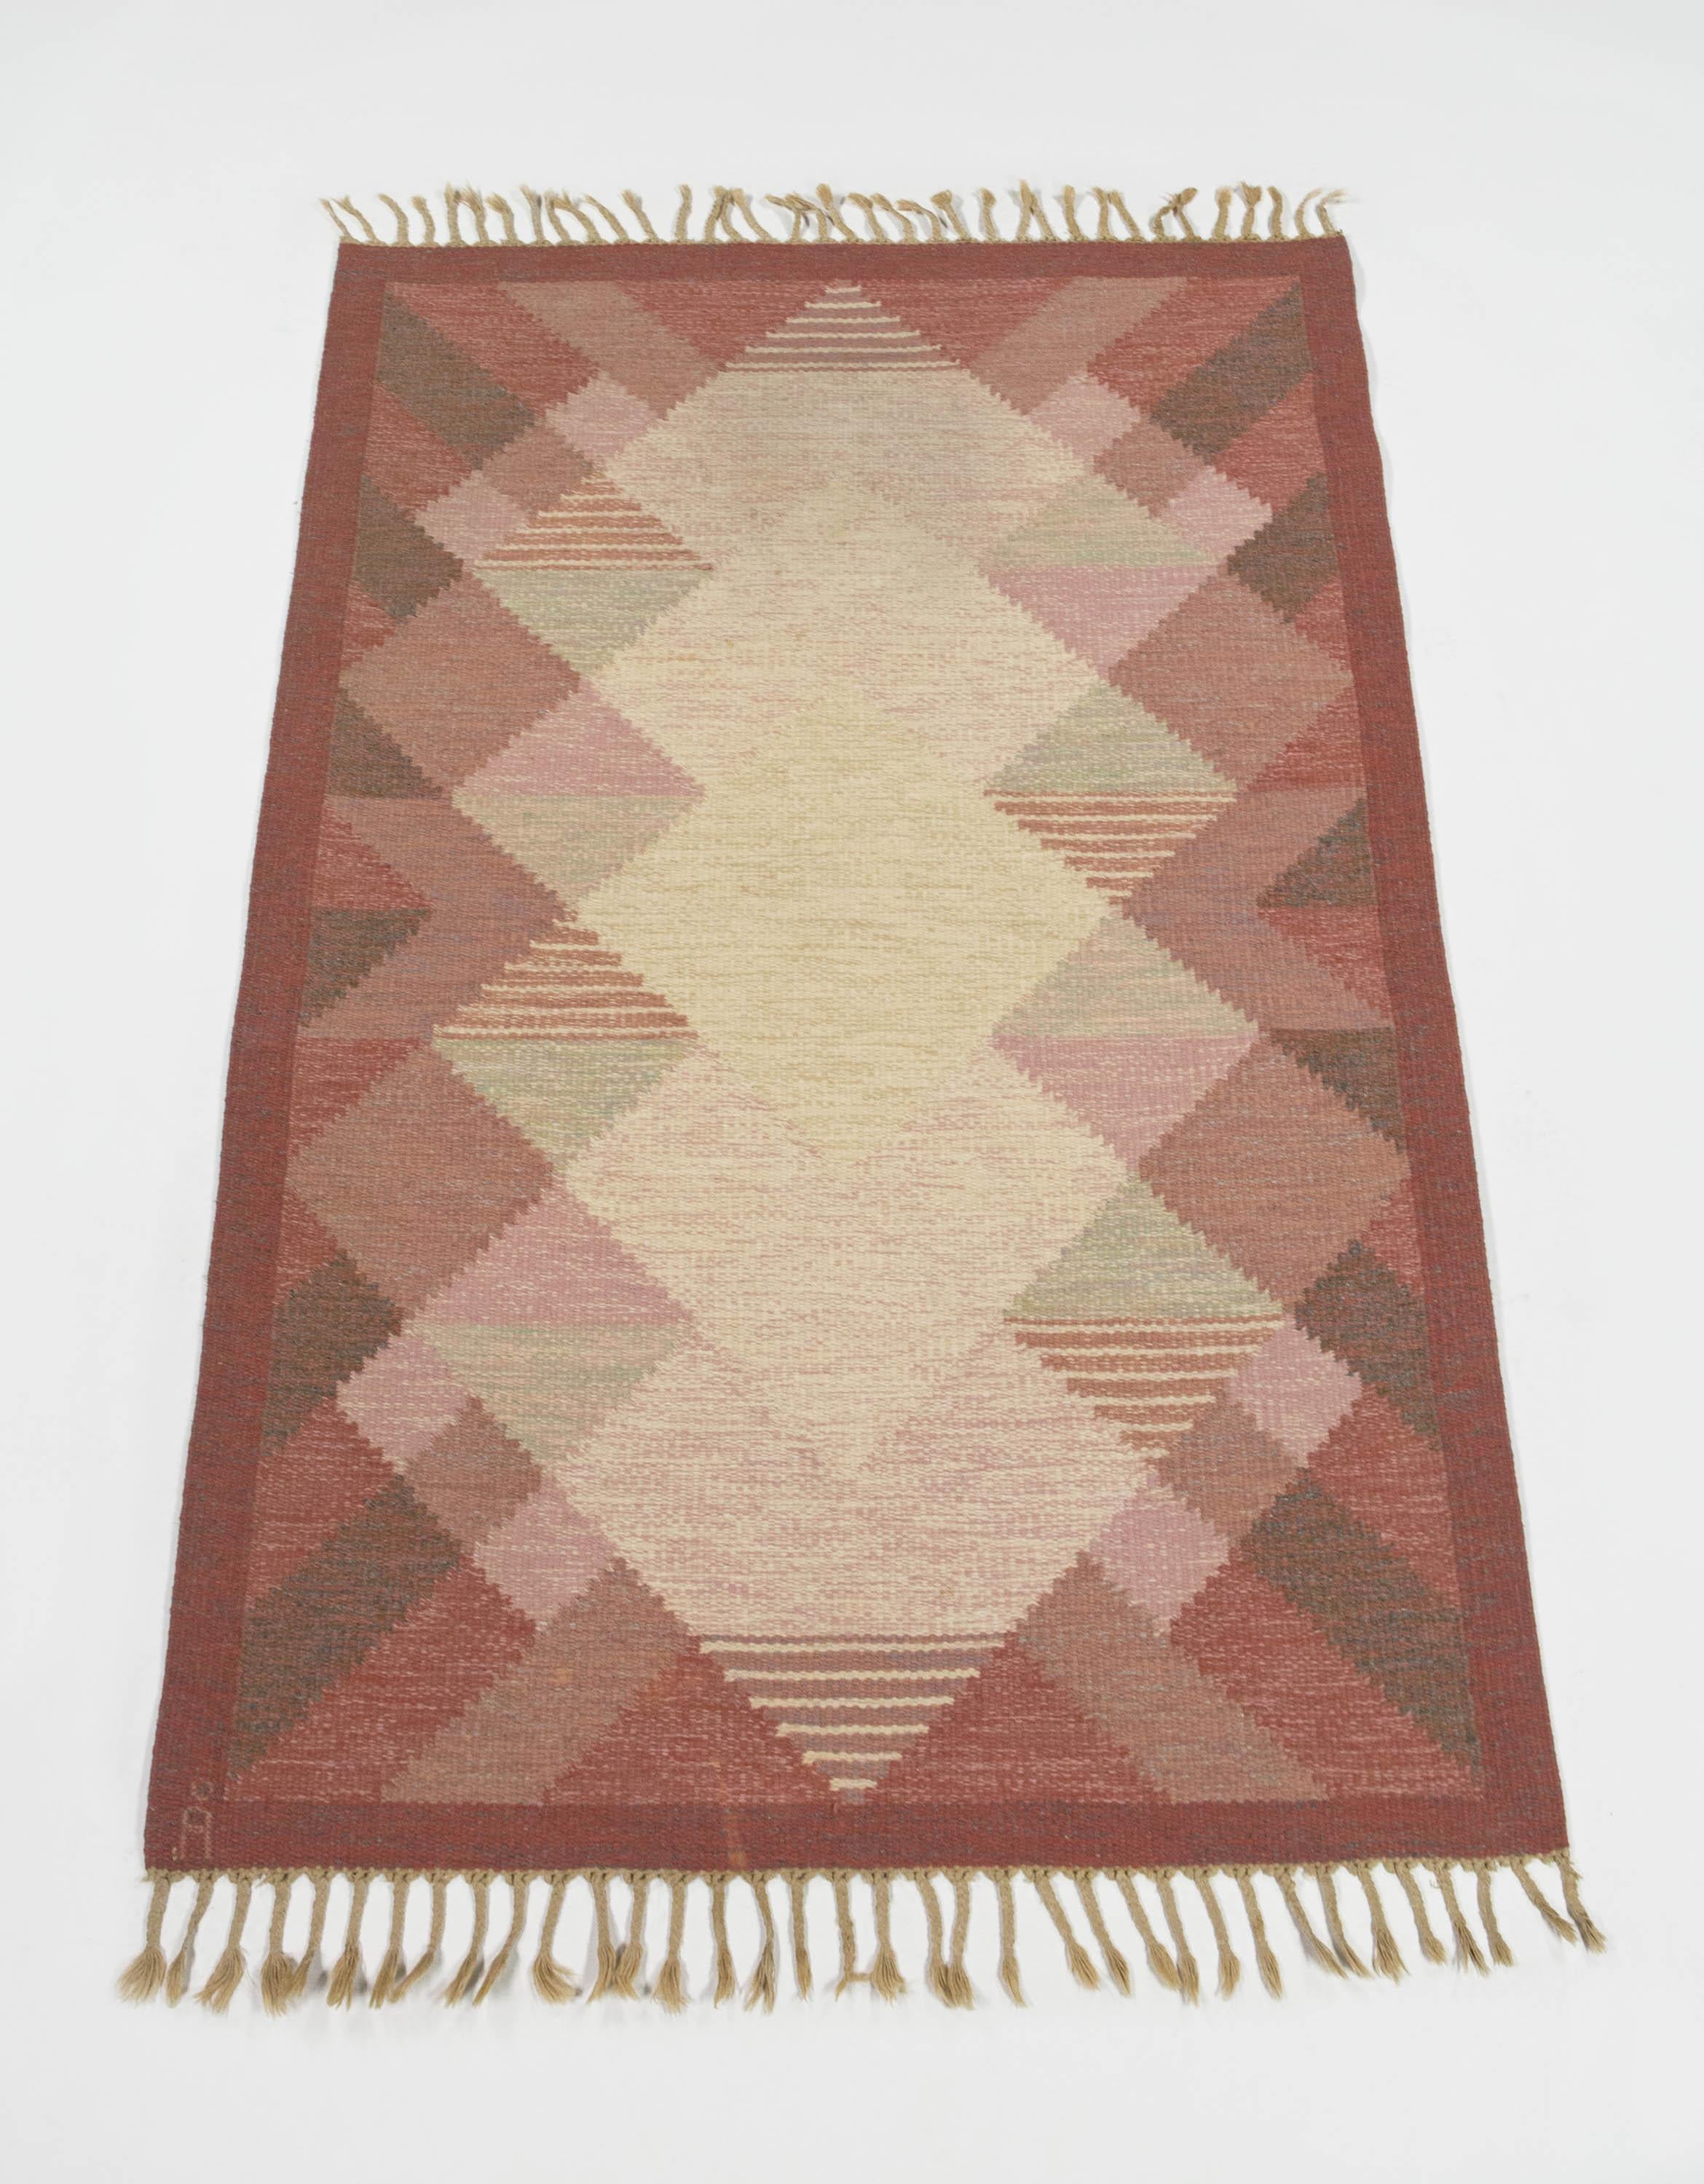 Anna Johanna A°ngstro¨m Swedish Ro¨lakan rug with pink Geometric pattern 1960's

Signed 